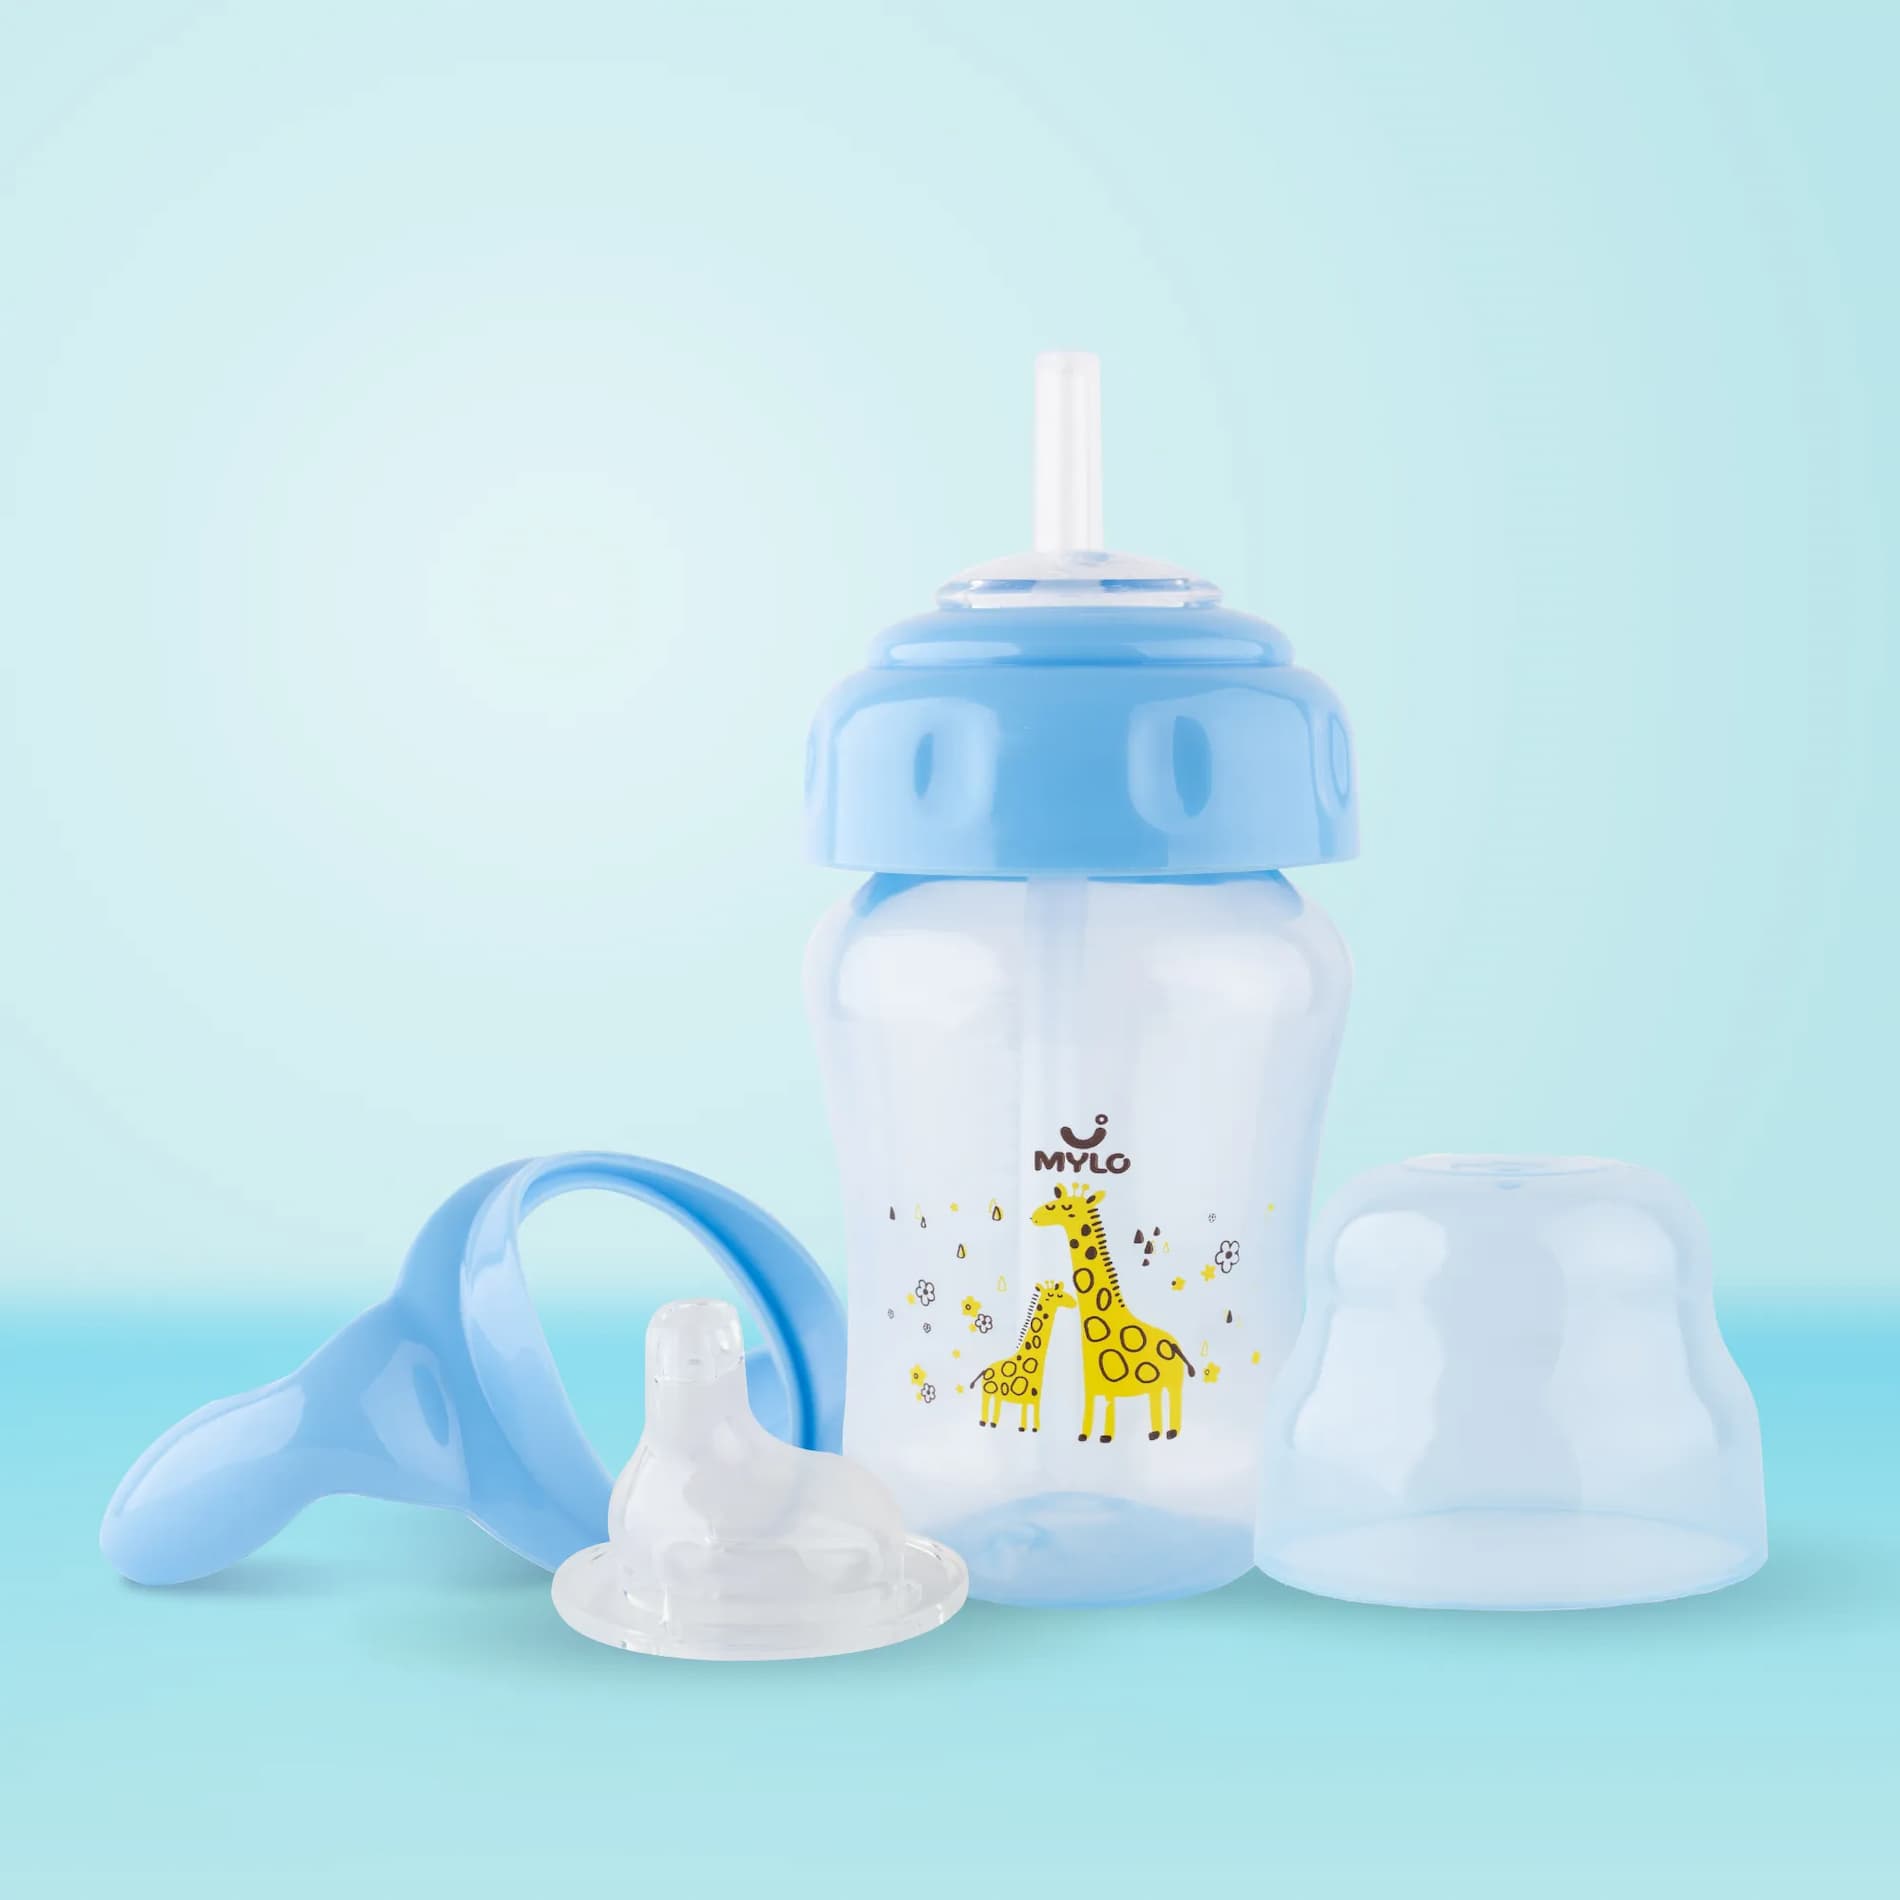 Baby Sipper | 2-in-1 Convertible Sipper with Spout & Straw | Sipper Bottle for Kids - 210ml - BPA-Free (Blue)